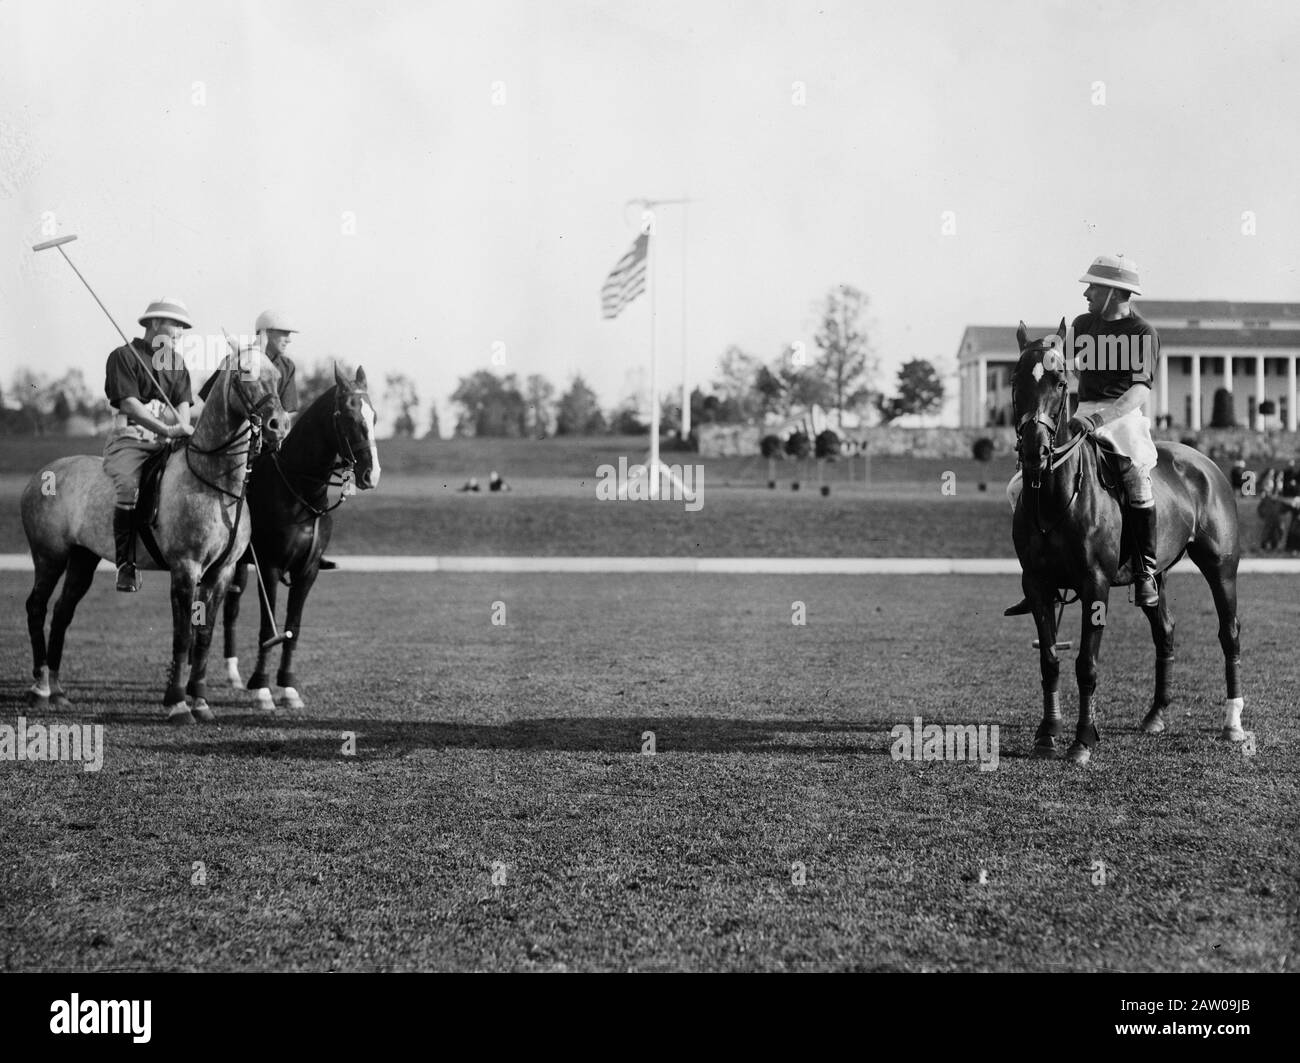 Players in international polo match at Piping Rock Club in Locust Valley, Long Island, June 1913 Stock Photo